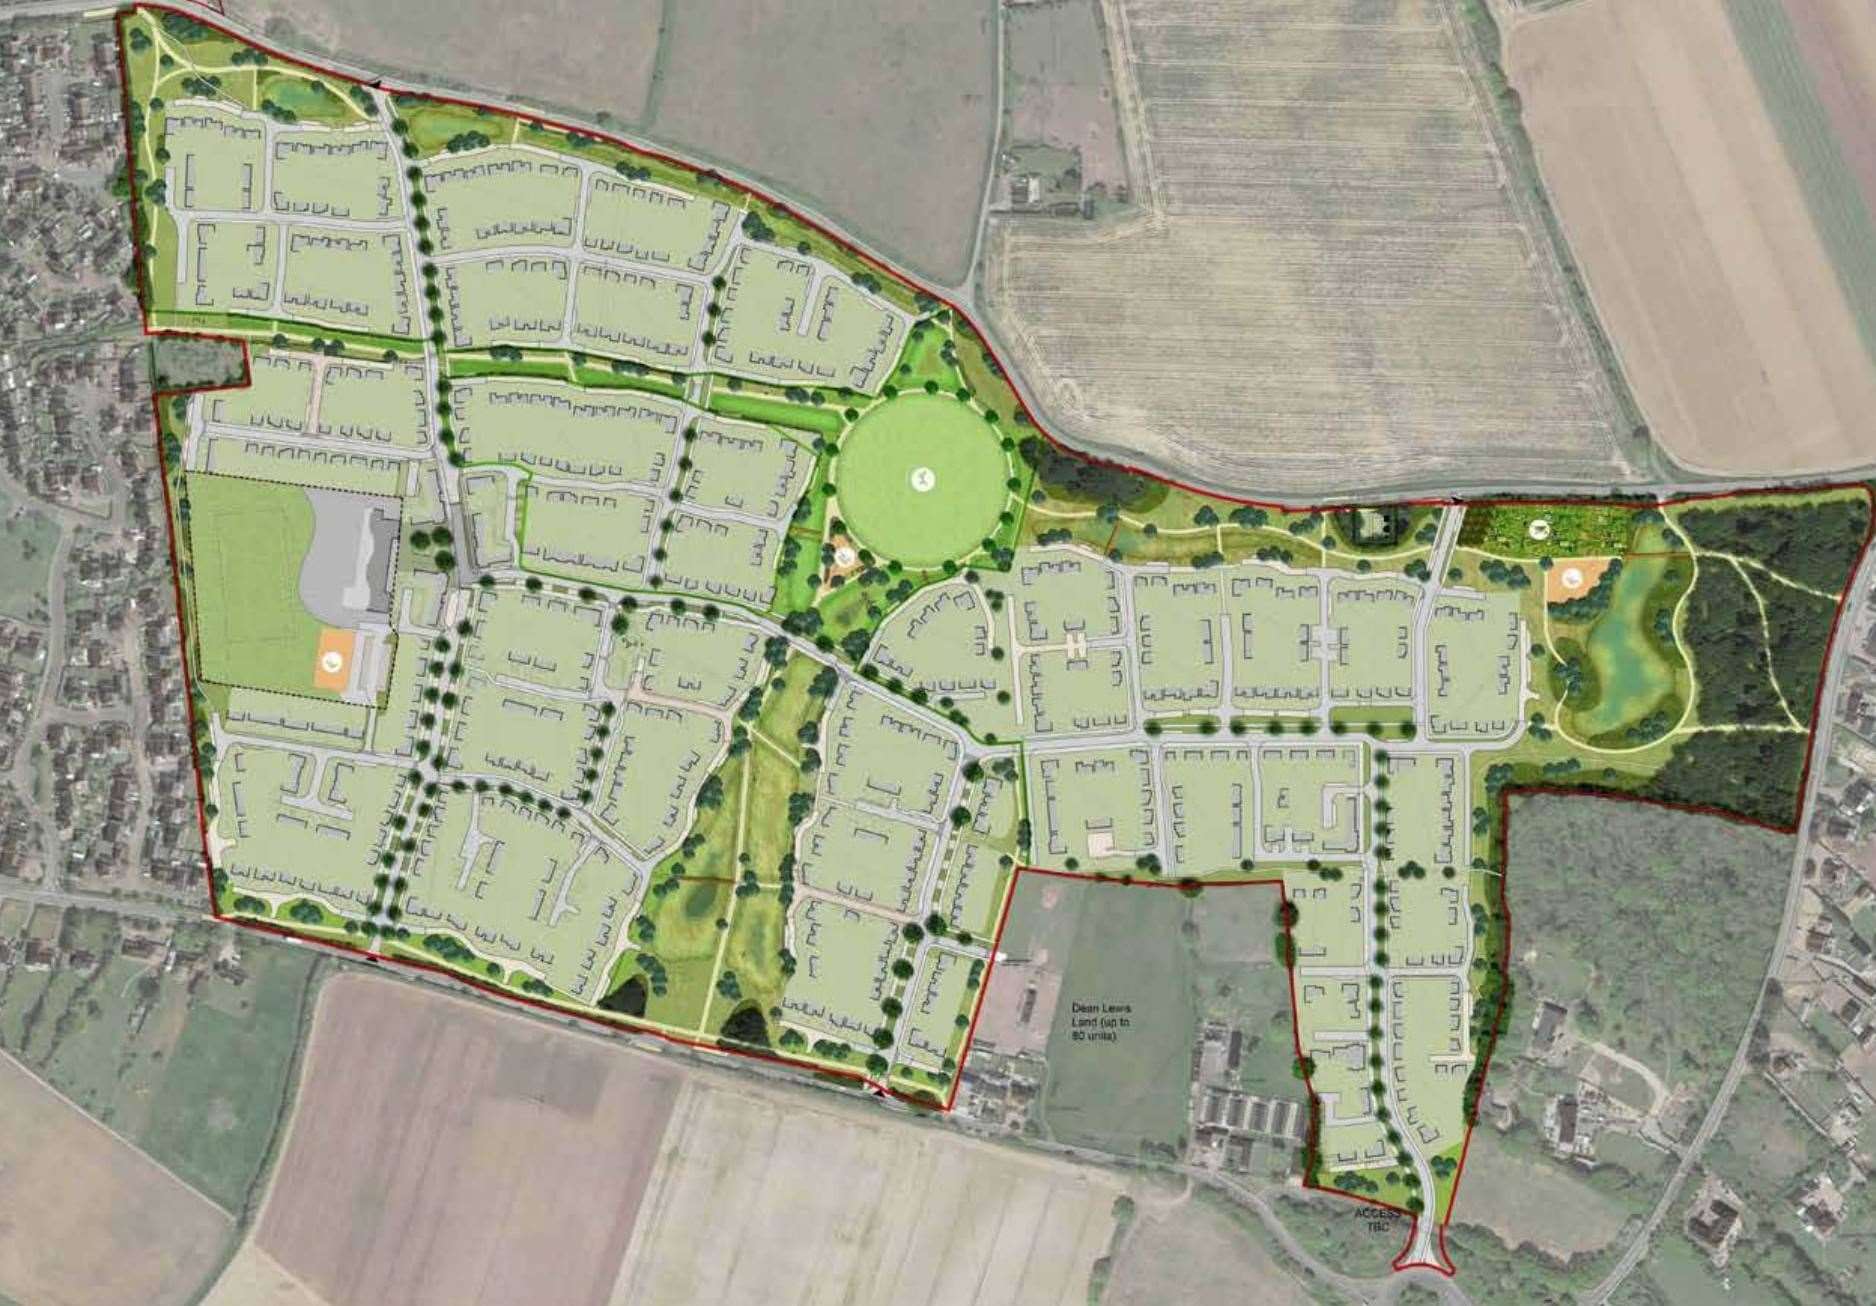 Plans for more than 700 homes in High Halstow have been submitted